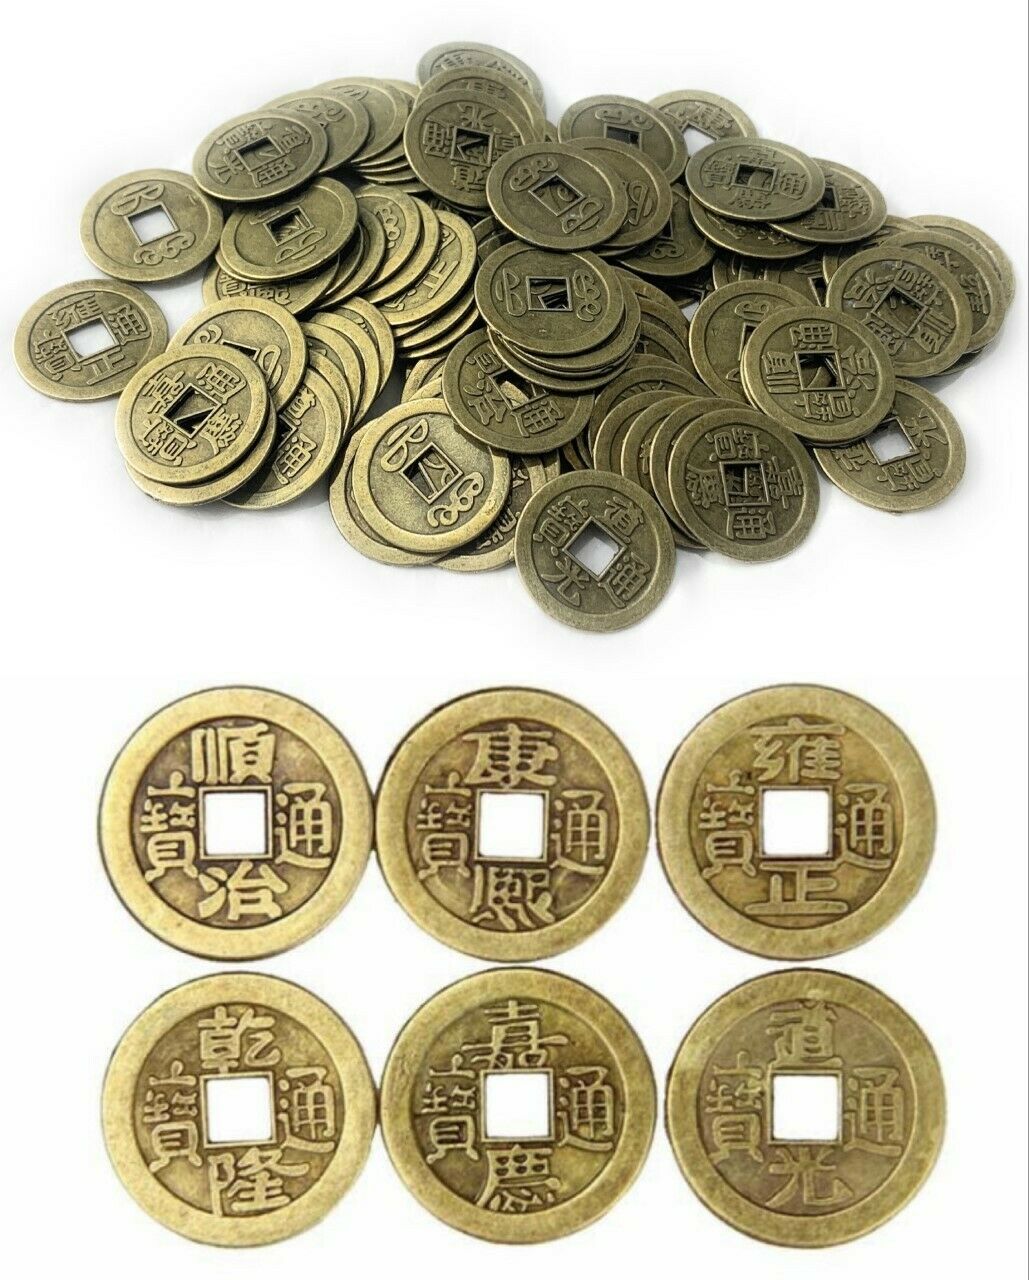 100 x Chinese Dynasty Emperor Feng Shui Lucky Play Coins 24mm w/ Square Hole UK